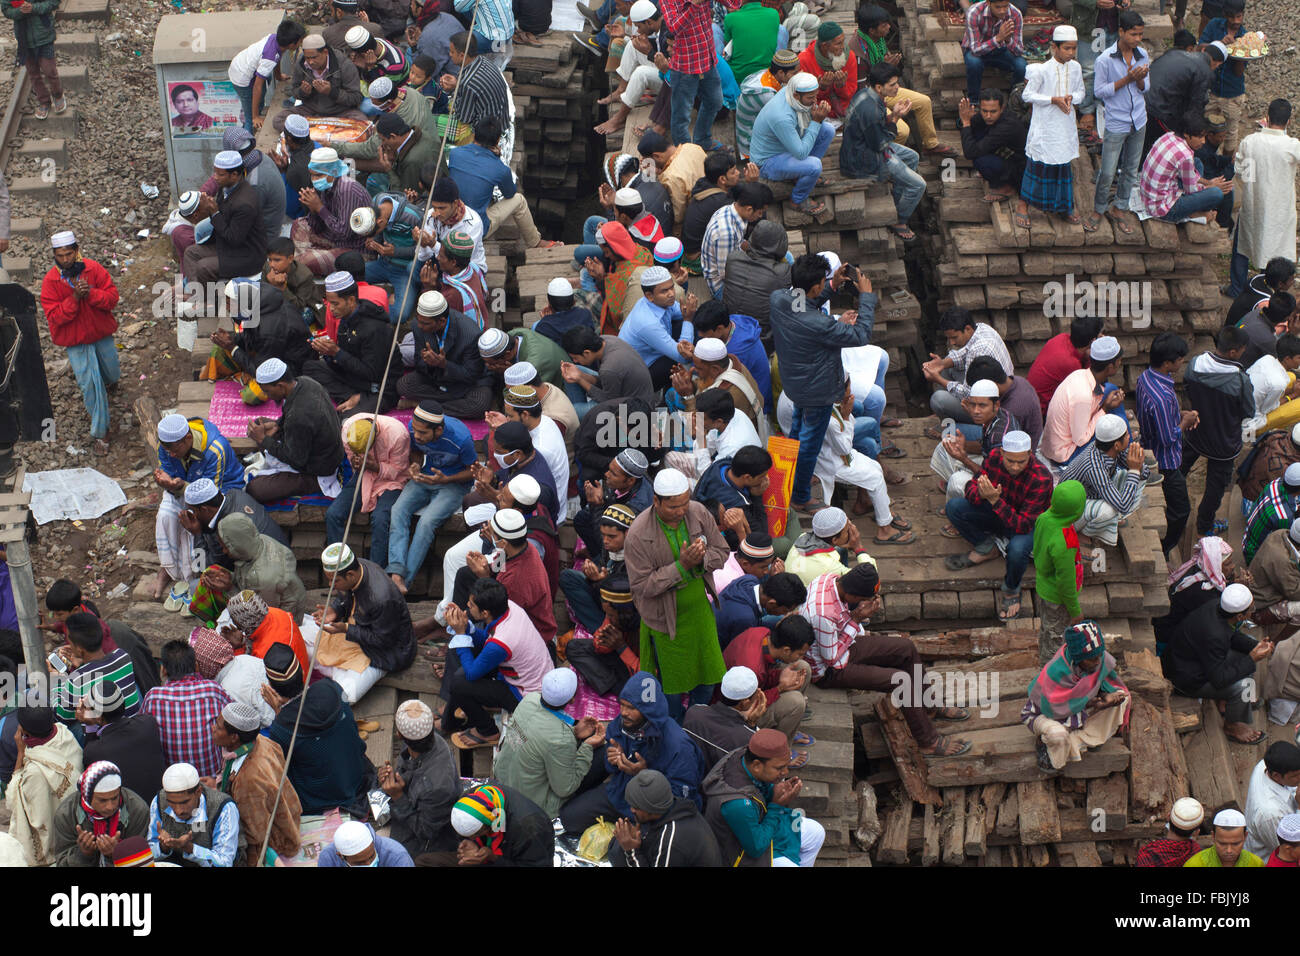 DHAKA, BANGLADESH 10th January 2016: Bangladeshi Muslim devotees attend the Akheri Munajat concluding prayers on the third day of Biswa Ijtema, the second largest Muslim congregation after the Hajj, at Tongi Railway station in Tongi 20 km from Dhaka on January 10, 2016. Around two million Muslims from Bangladesh and abroad observed the three-day congregation with prayers on the banks of the Turag River. Stock Photo